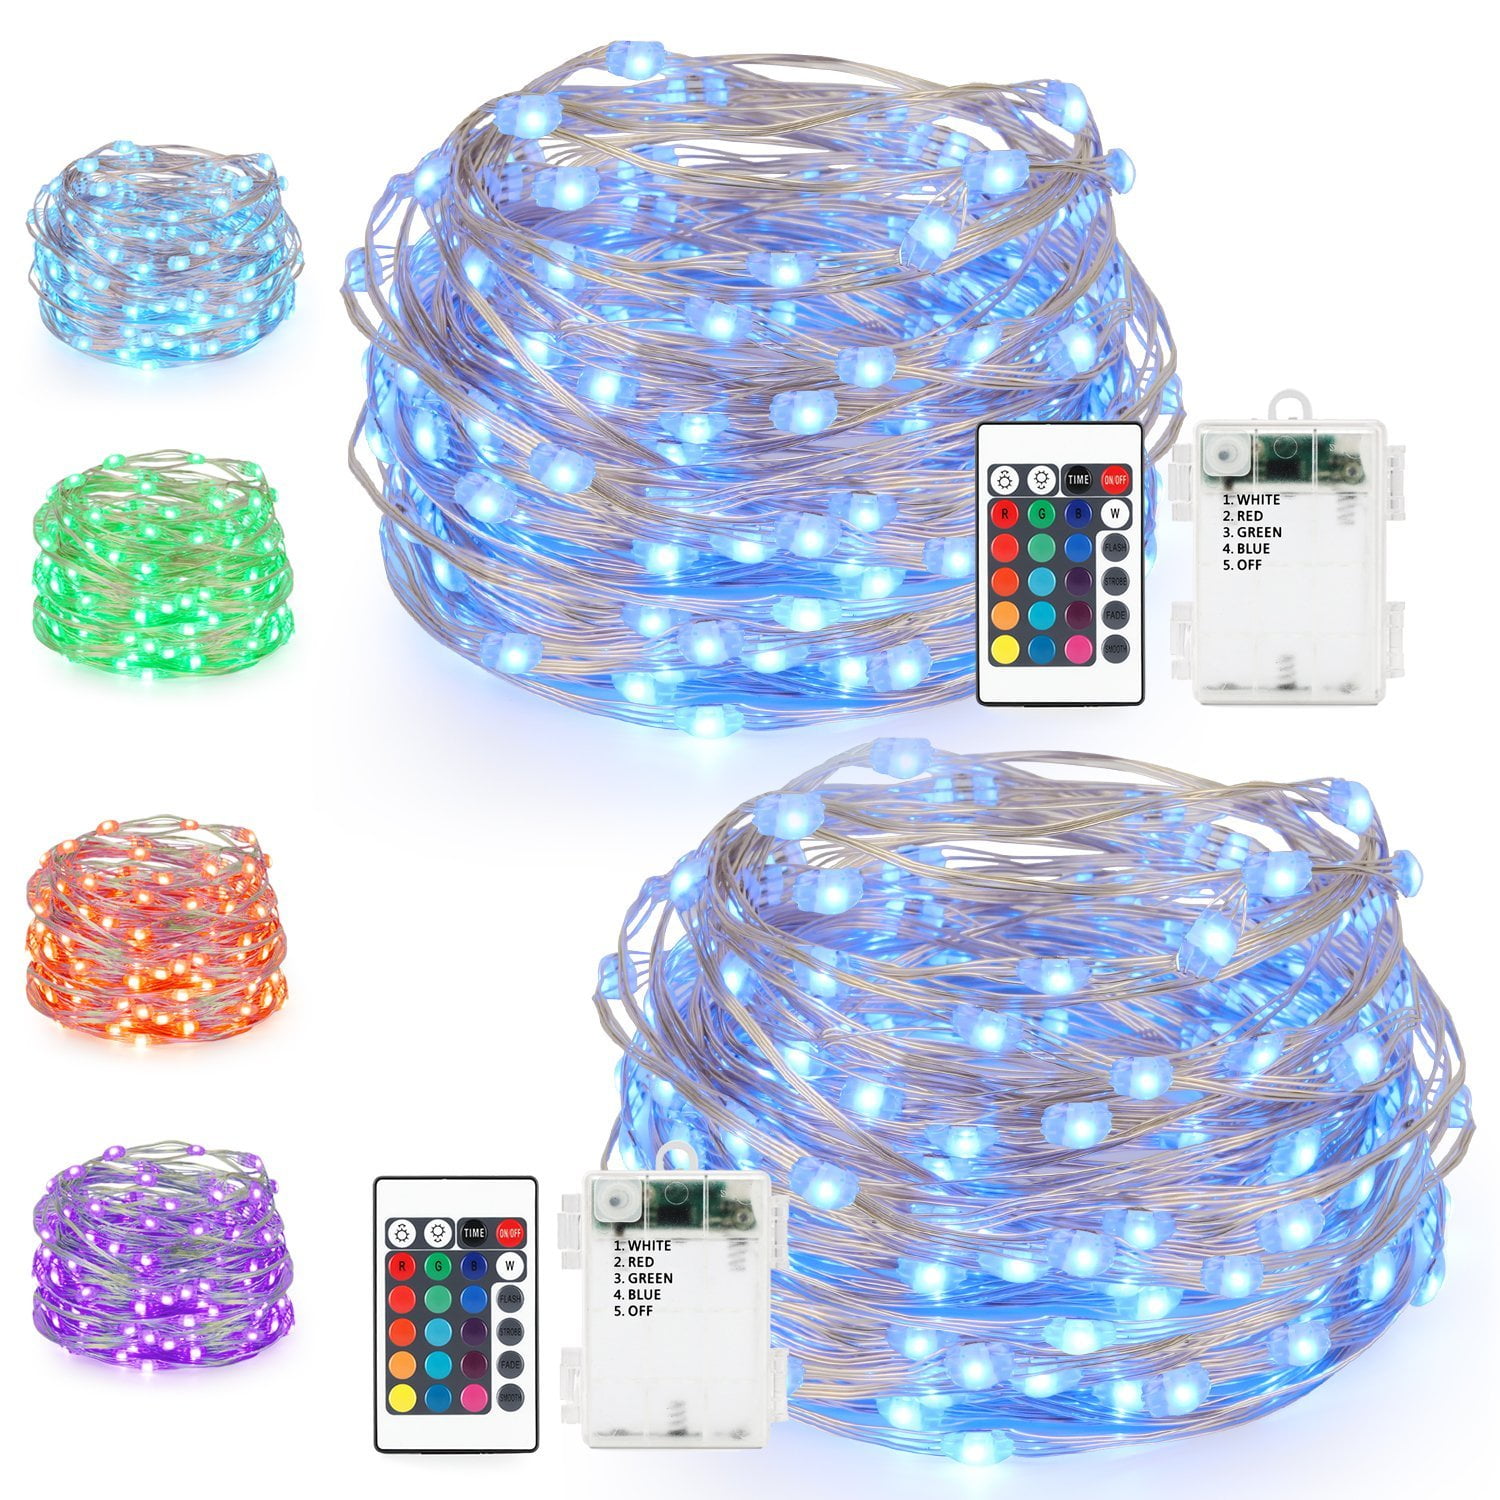 AA Battery Powered Twinkle Lights for Holiday Kohree String Lights LED Copper Wire Fairy Christmas Tree Light with Remote Control Wedding 33ft/10M 100LEDs Pack of 2 Parties 